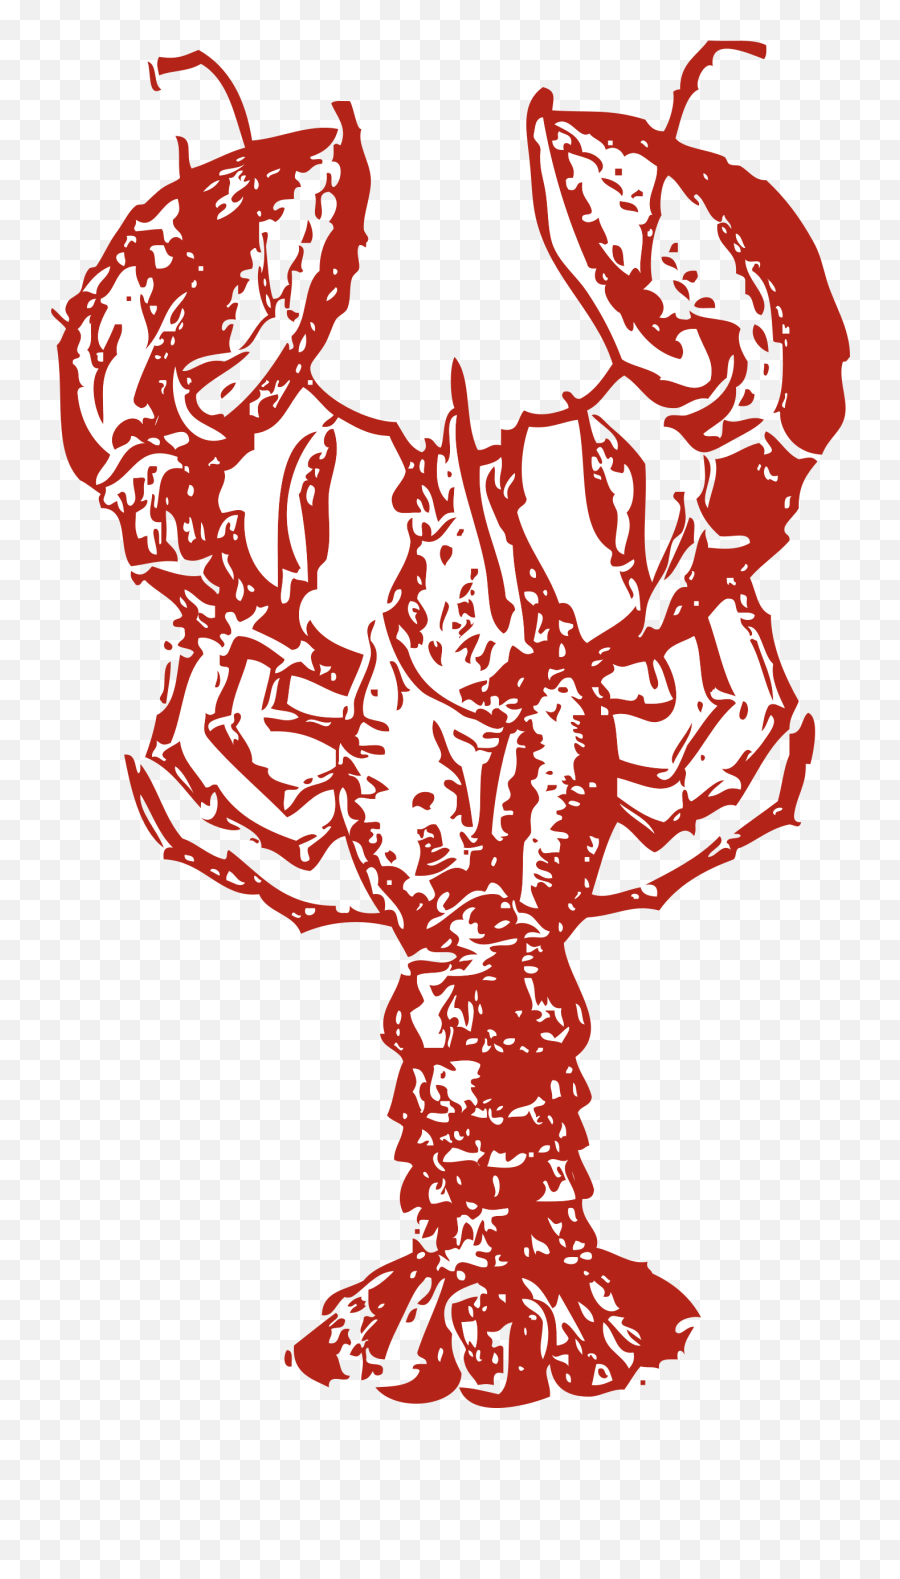 Download Lobster Hd Photos Clipart Png Free Freepngclipart - Lobster Illustration Png,Lobster Png